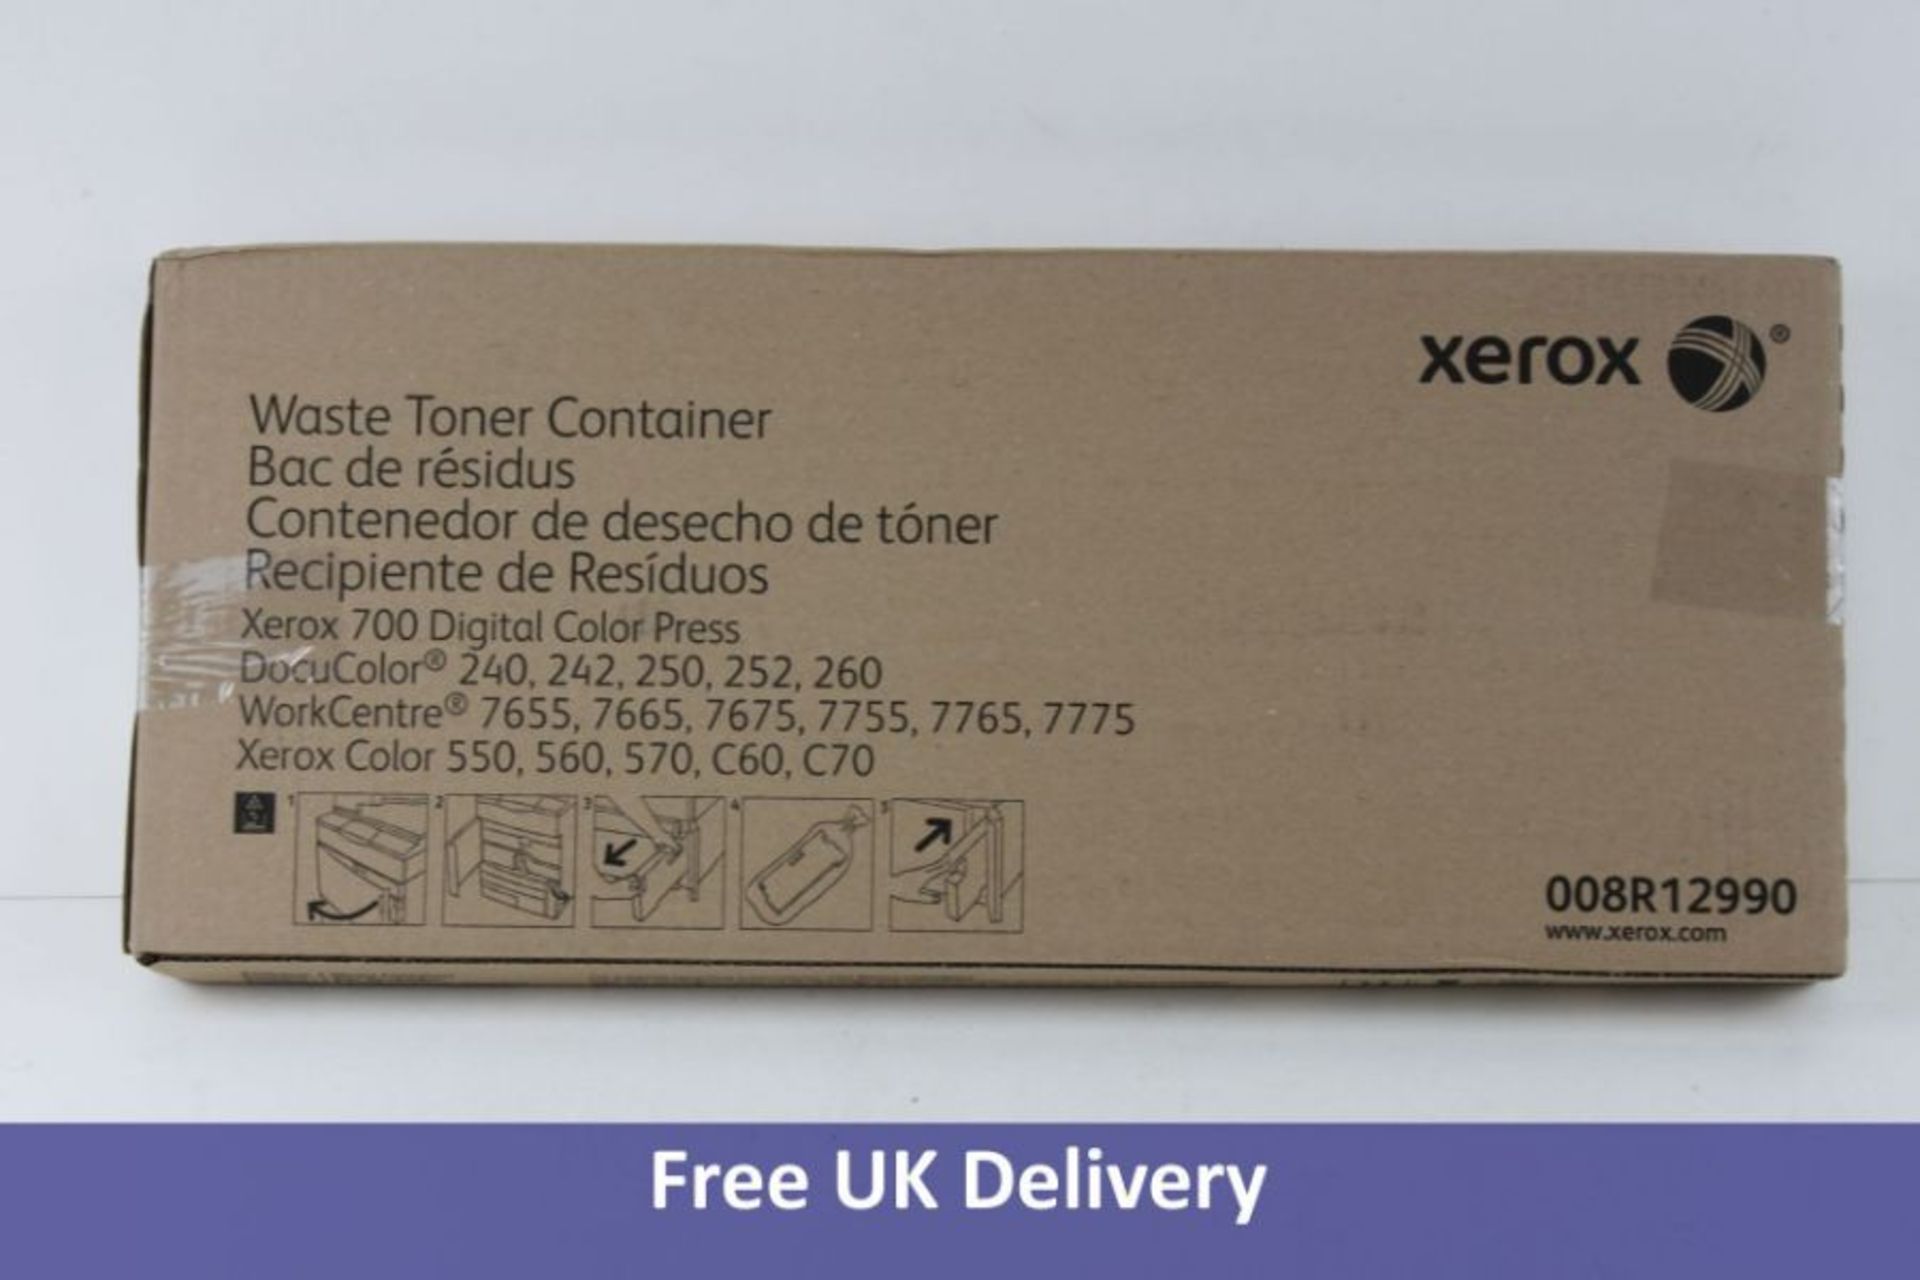 Xerox Waste Toner Container 50,000 Pages, 008R12990